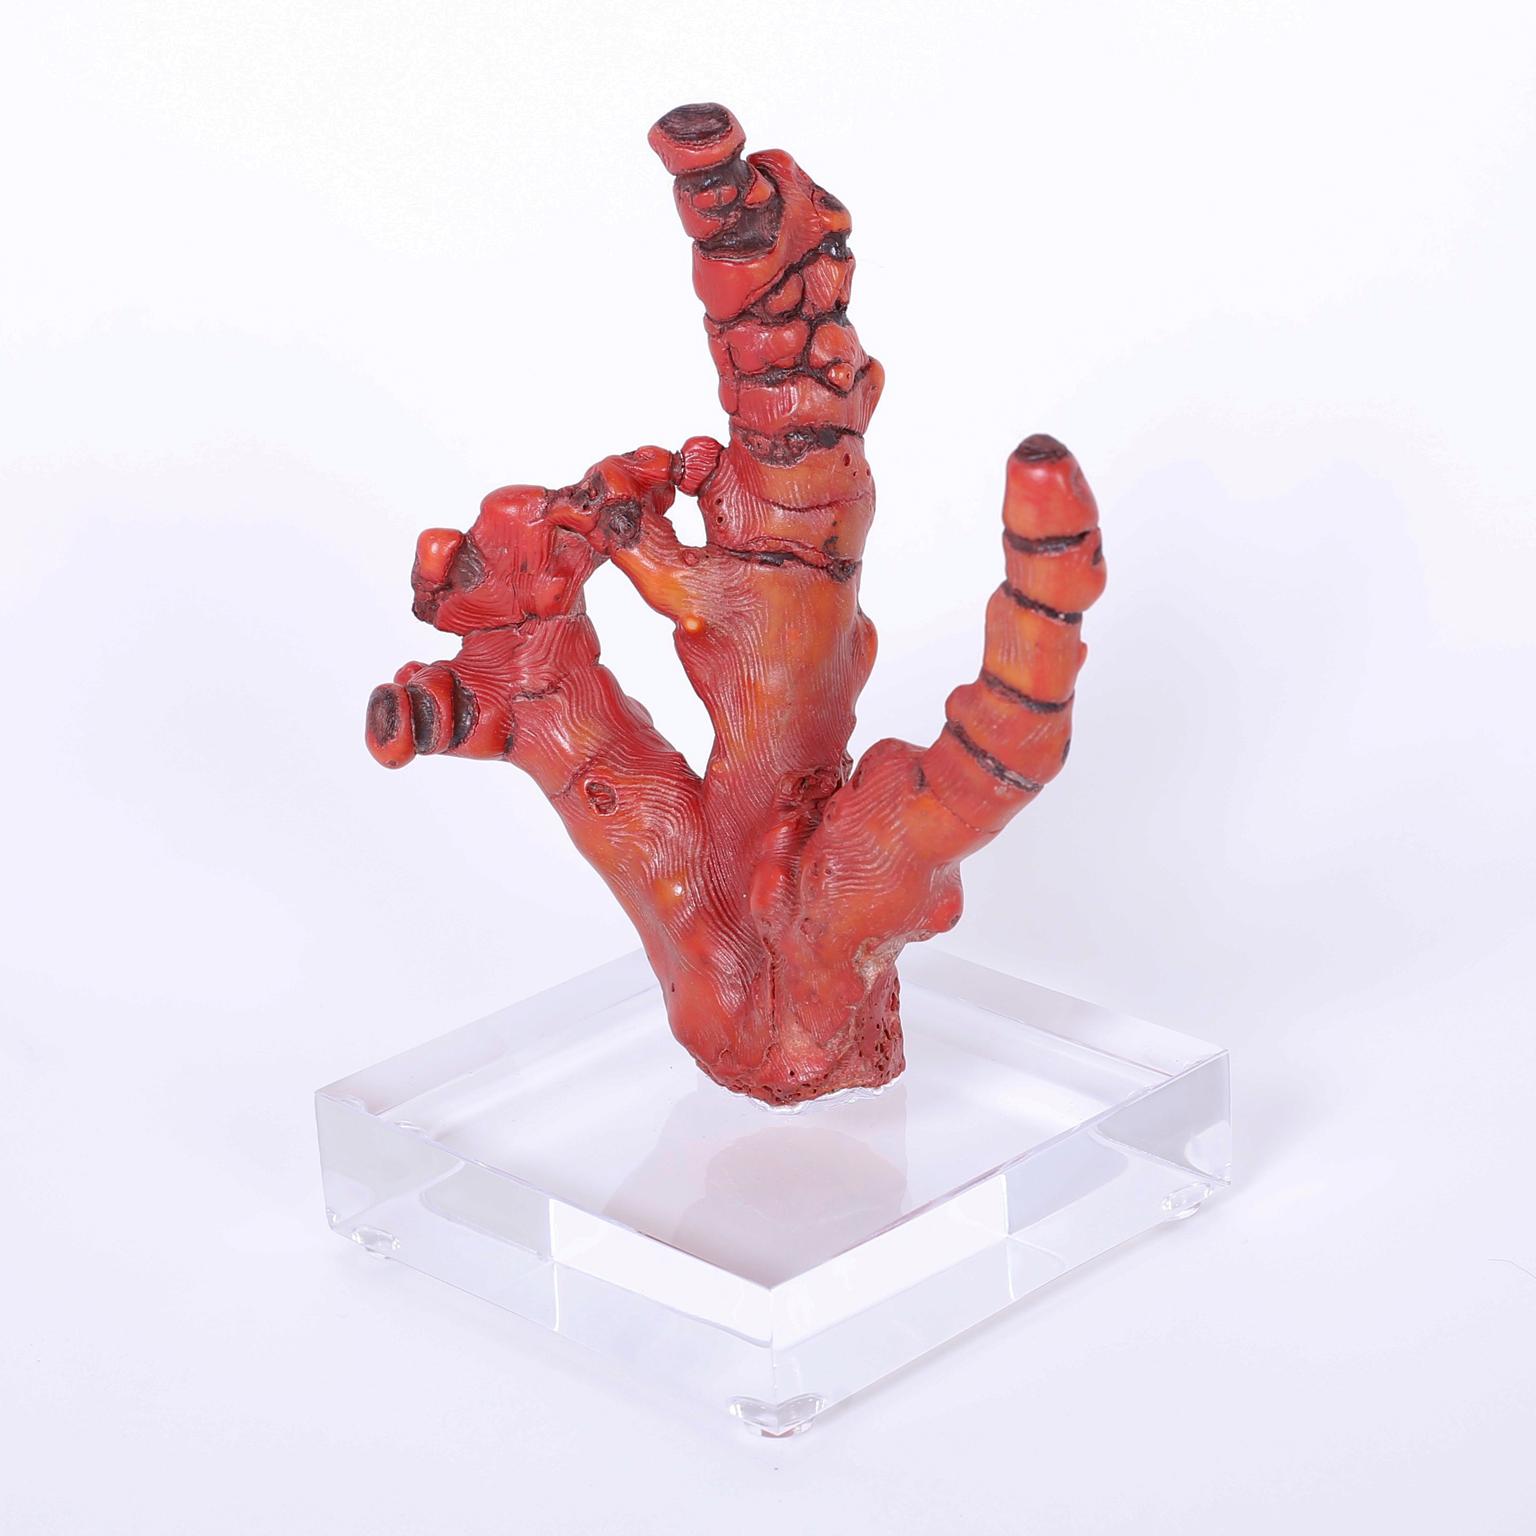 Here we have a red coral specimen with its iconic tropical color and organic sculptural form. Presented on a custom Lucite stand.
 